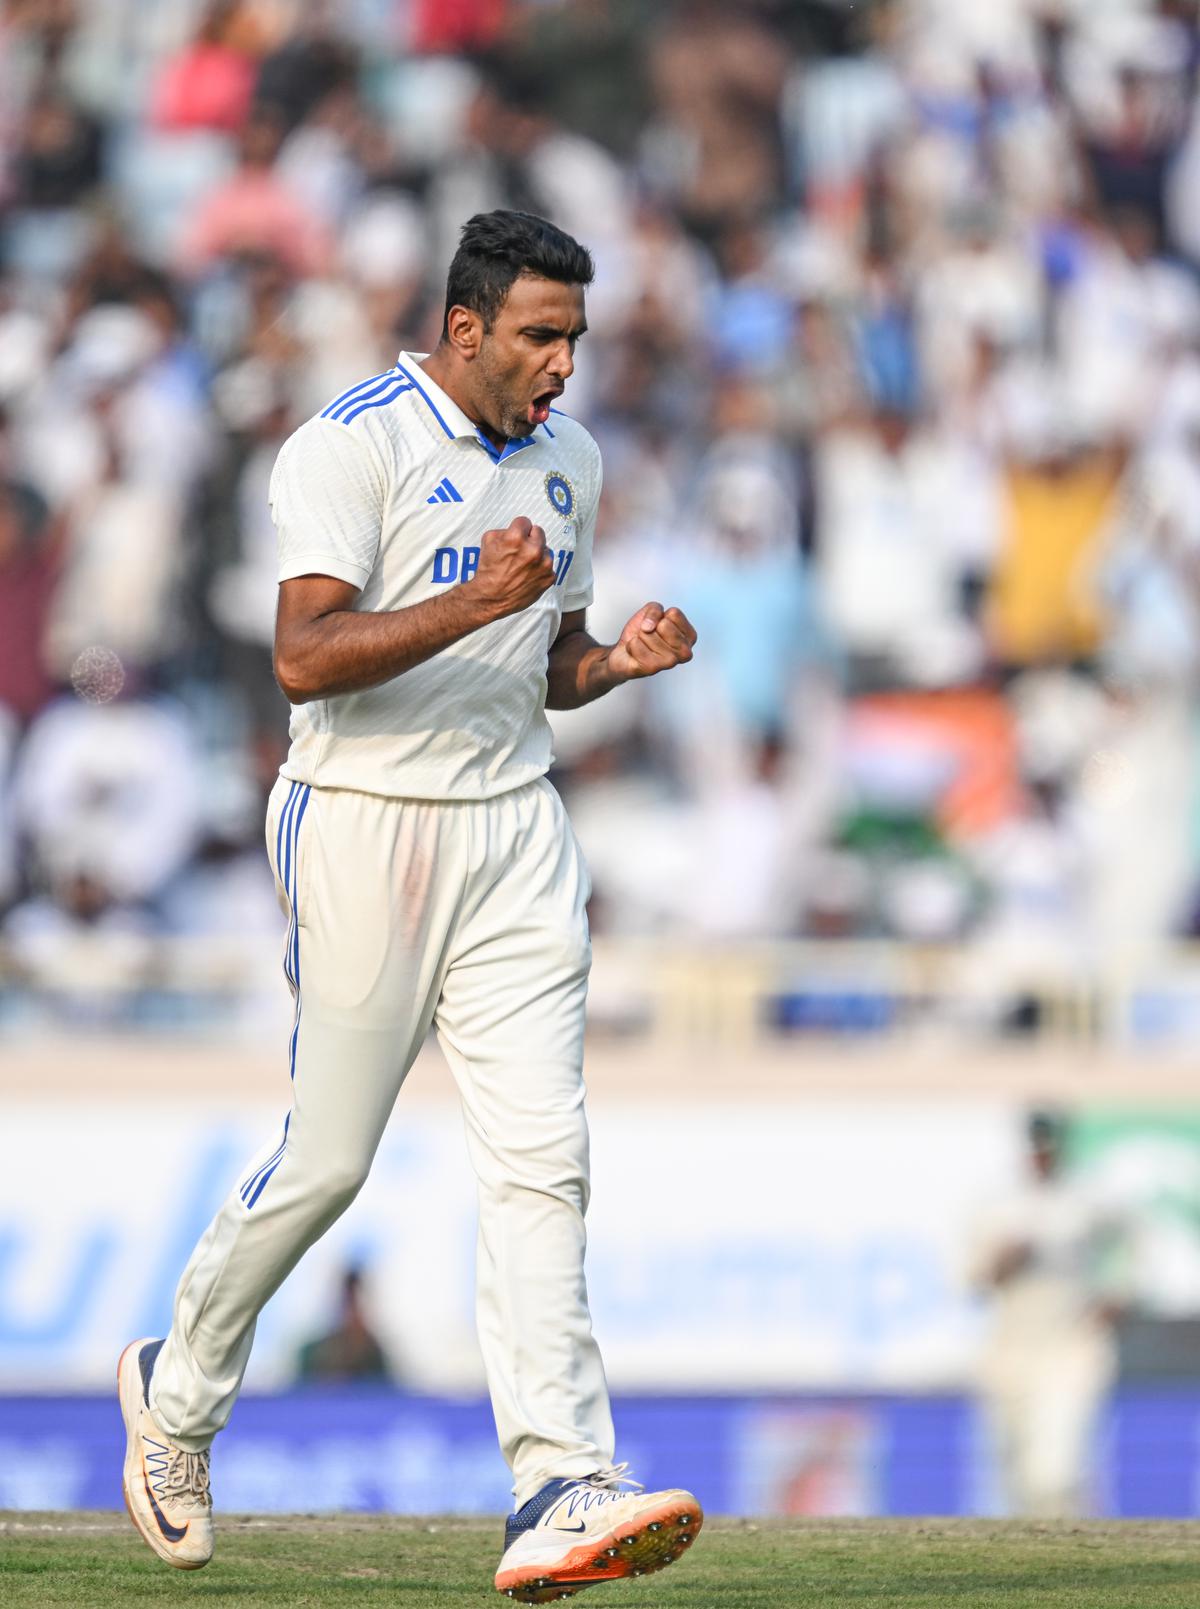 Ravichandran Ashwin equals Kumble's record of most Test five-wicket hauls for India